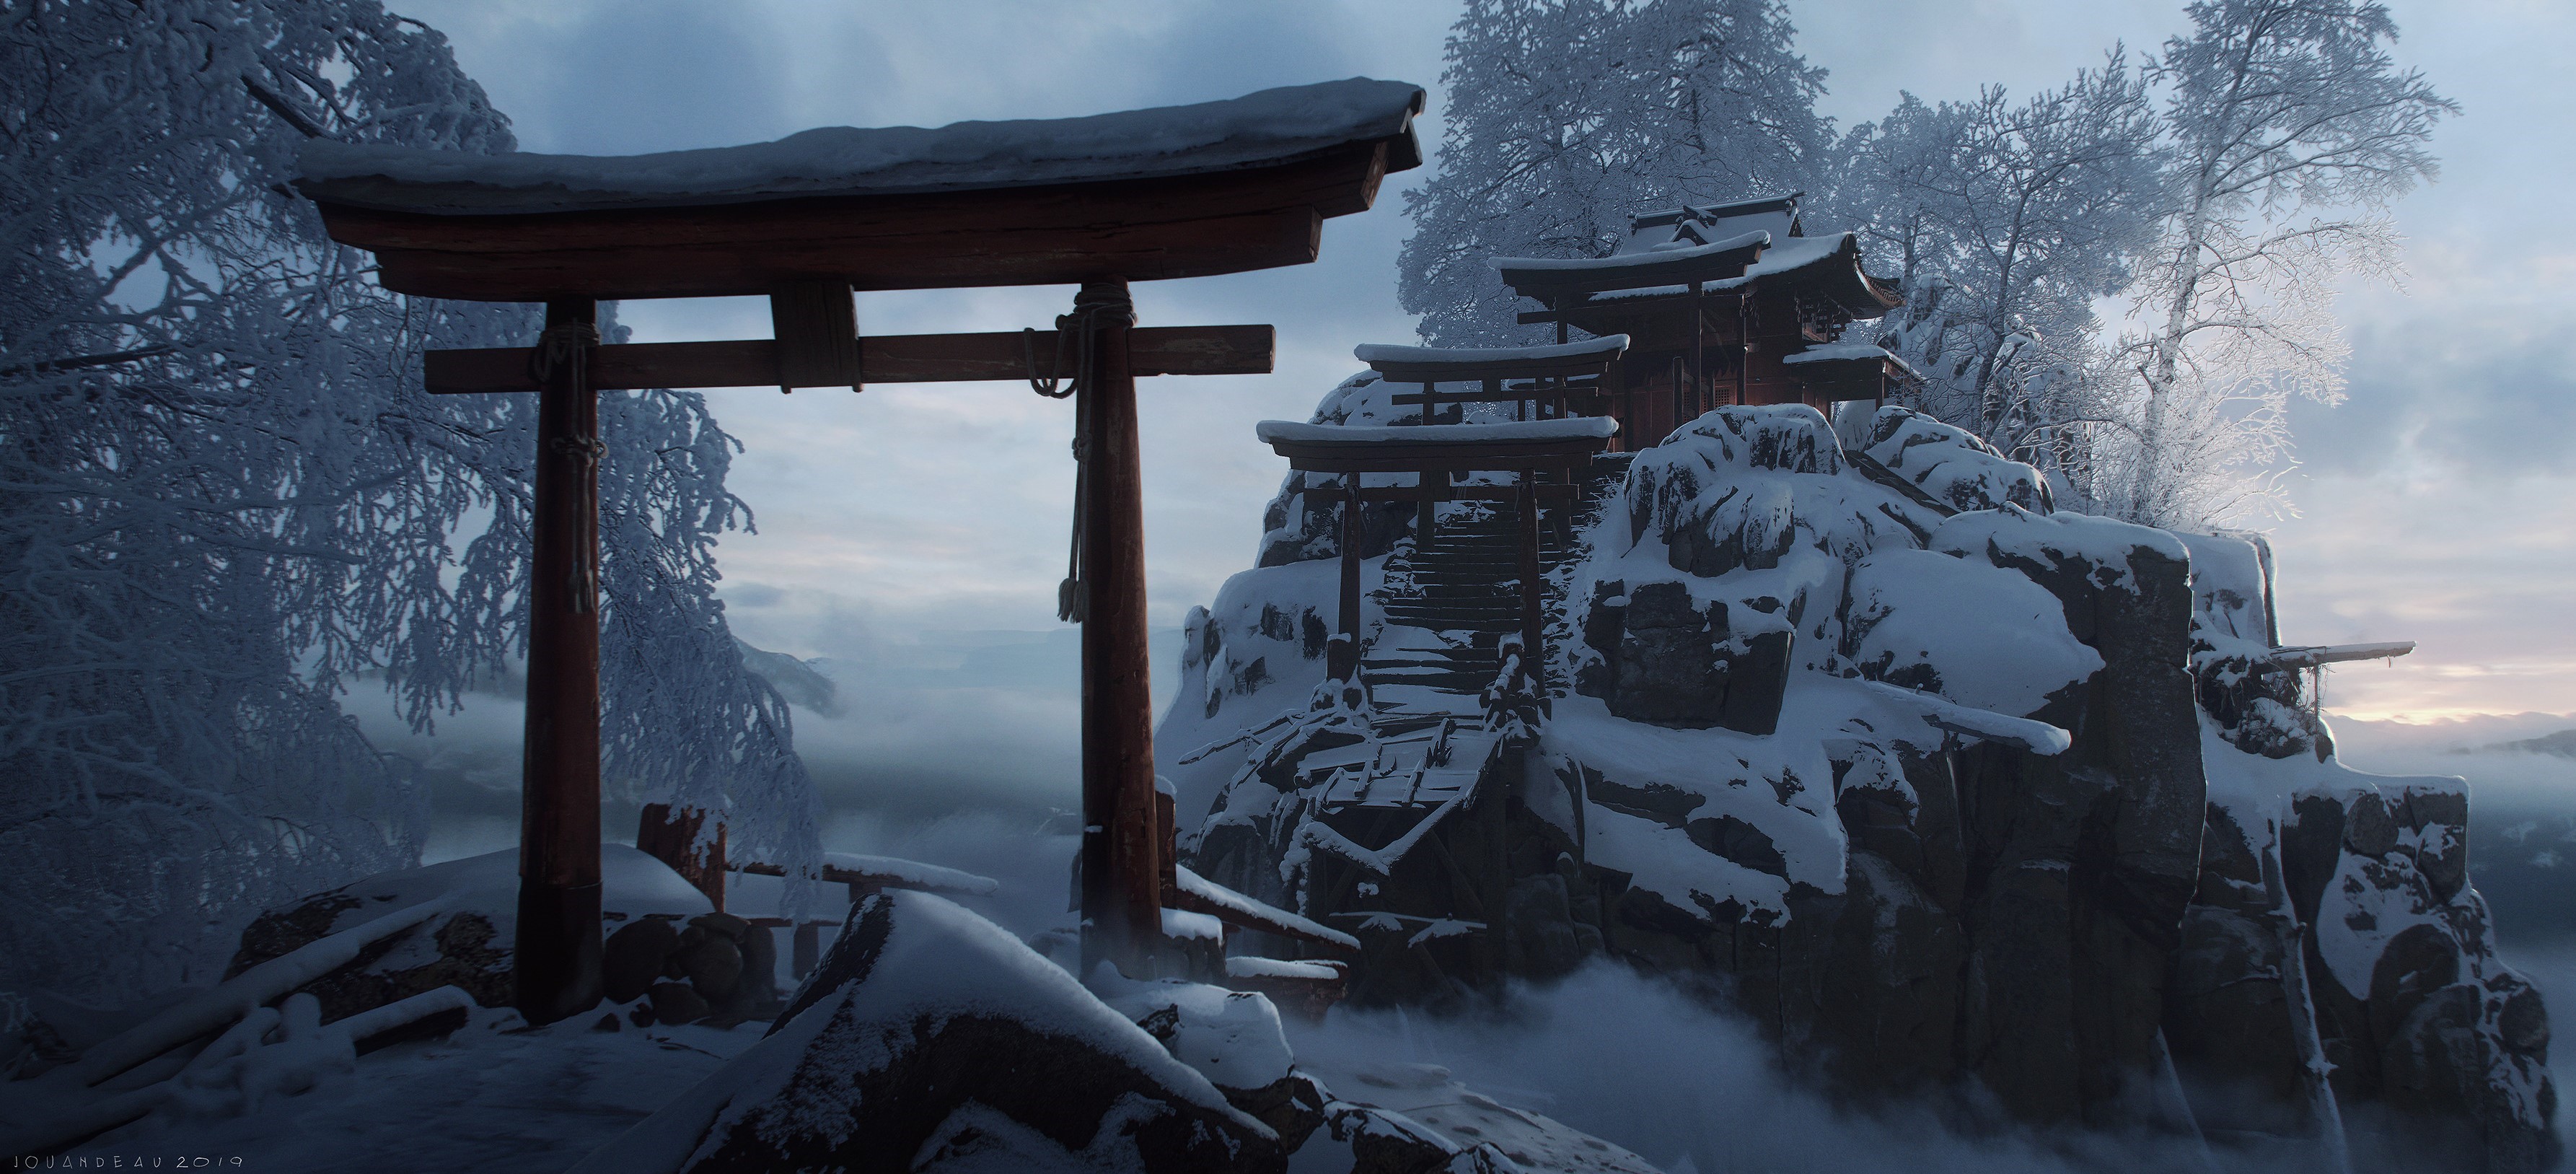 Romain Jouandeau Ghost Of Tsushima Temple Snow 3571x1627